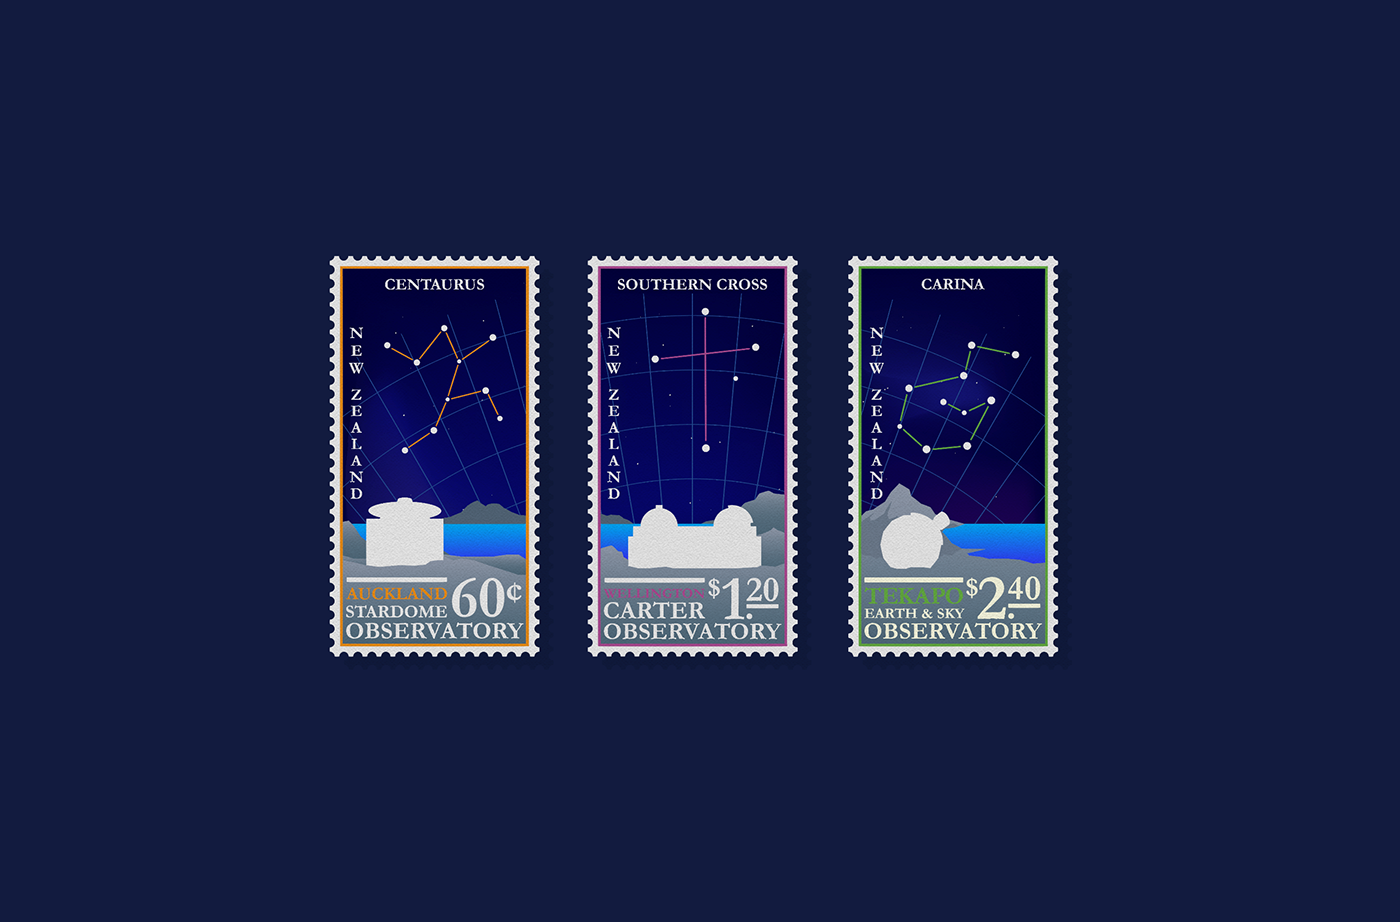 stamps Postage New Zealand stars Constellations design print post Collection Travel astronomy Observertory